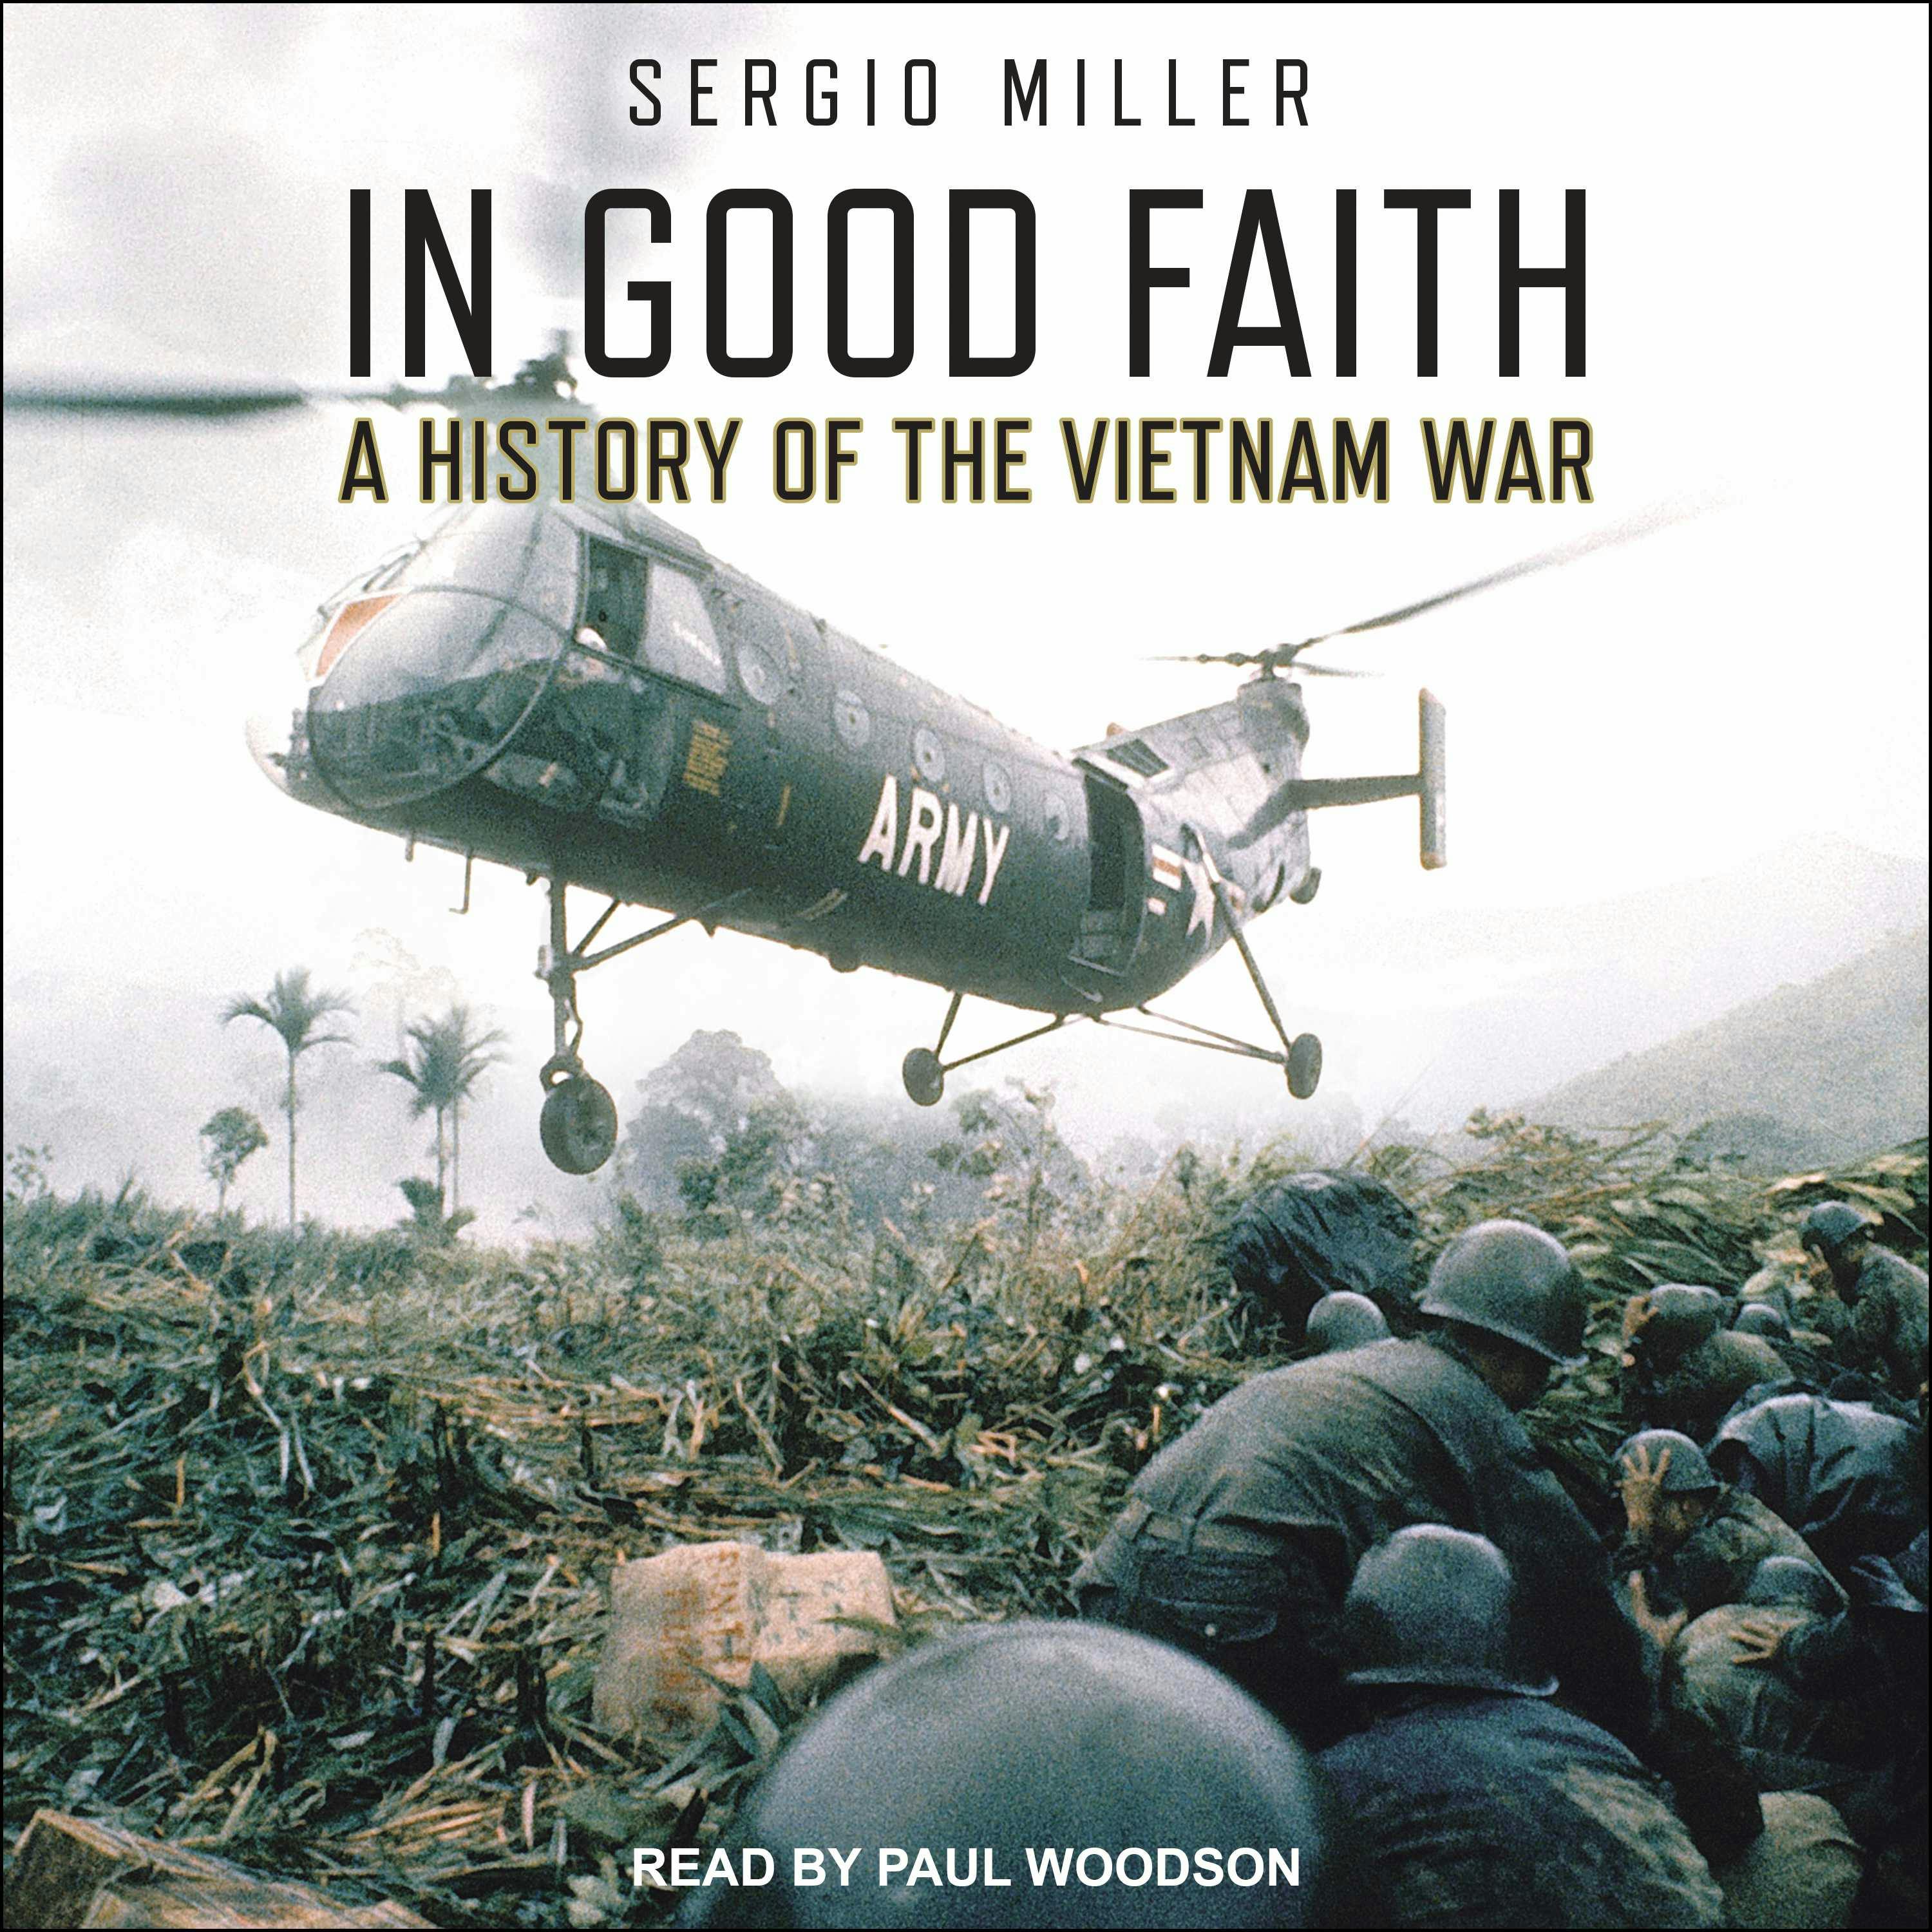 In Good Faith: A History of the Vietnam War Volume I: 1945-65 - Sergio Miller